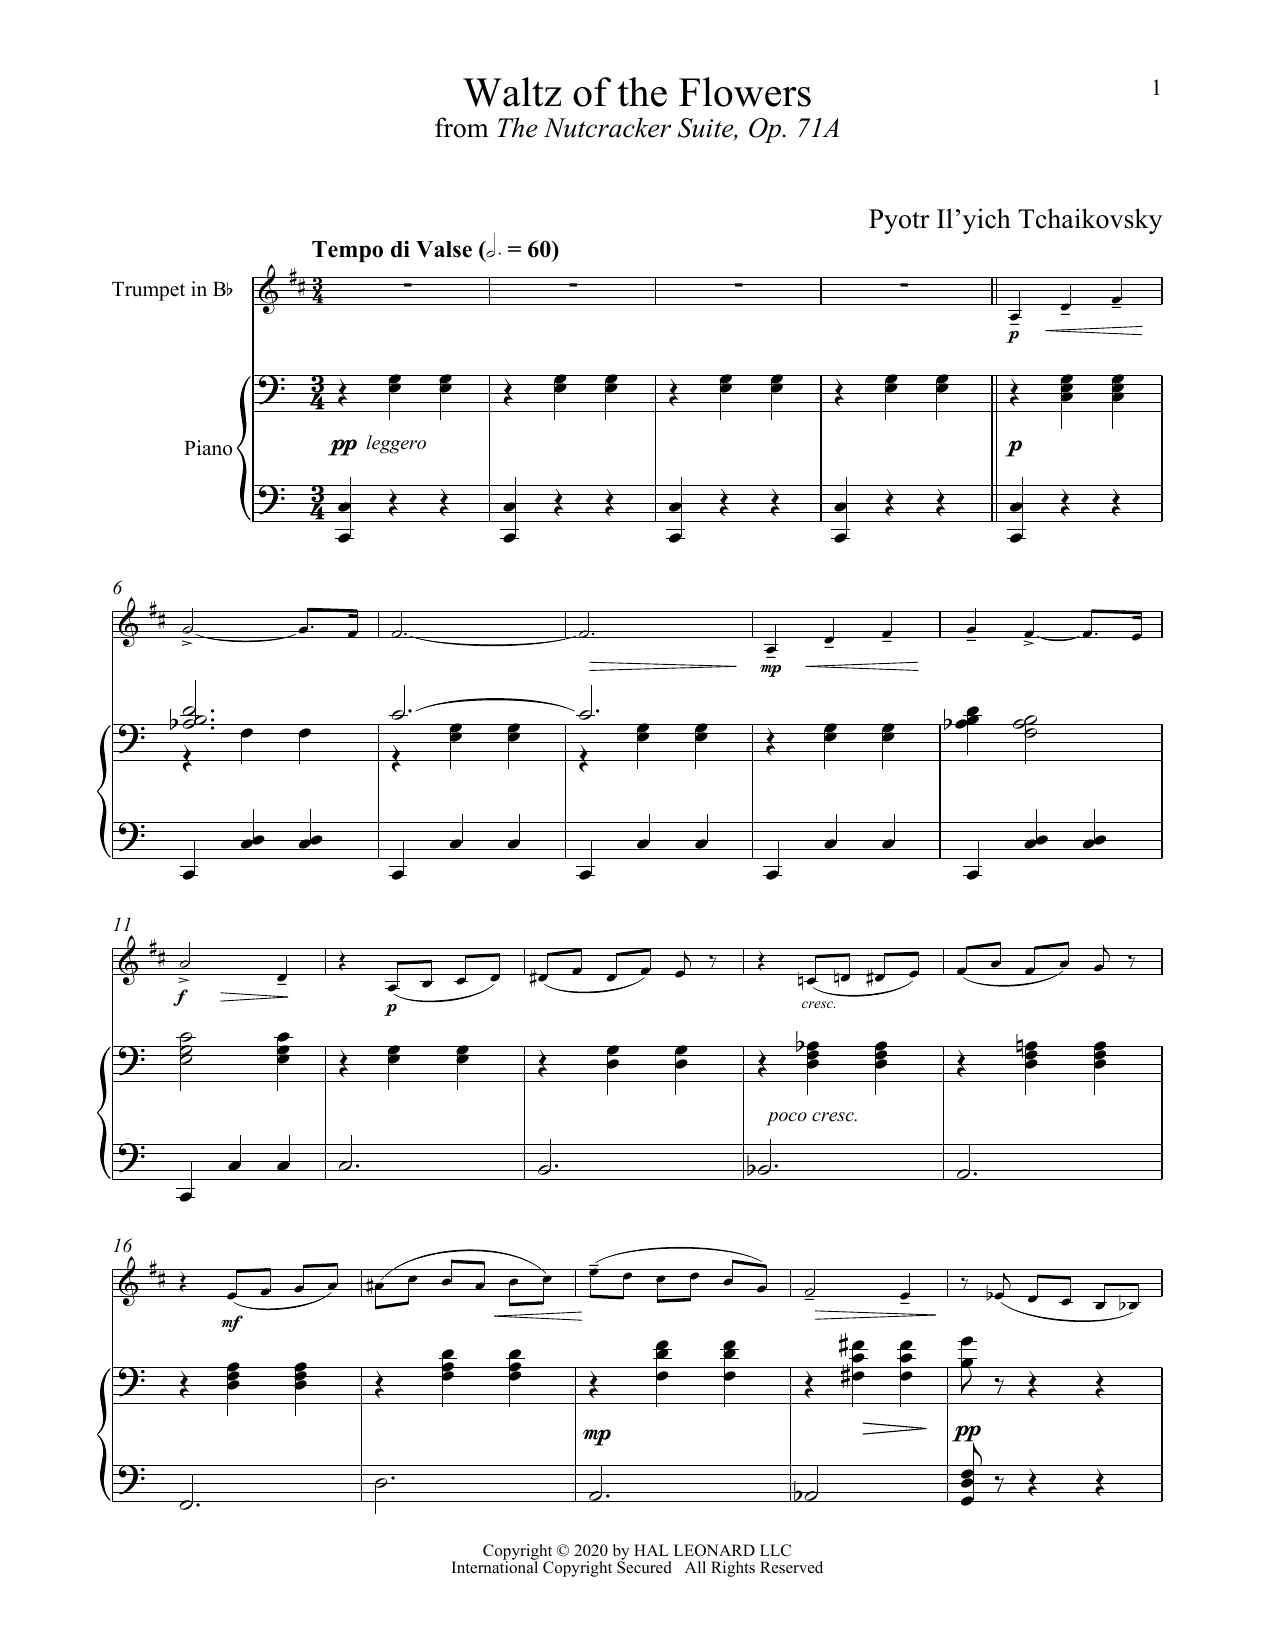 Download Pyotr Il'yich Tchaikovsky Waltz Of The Flowers, Op. 71a Sheet Music